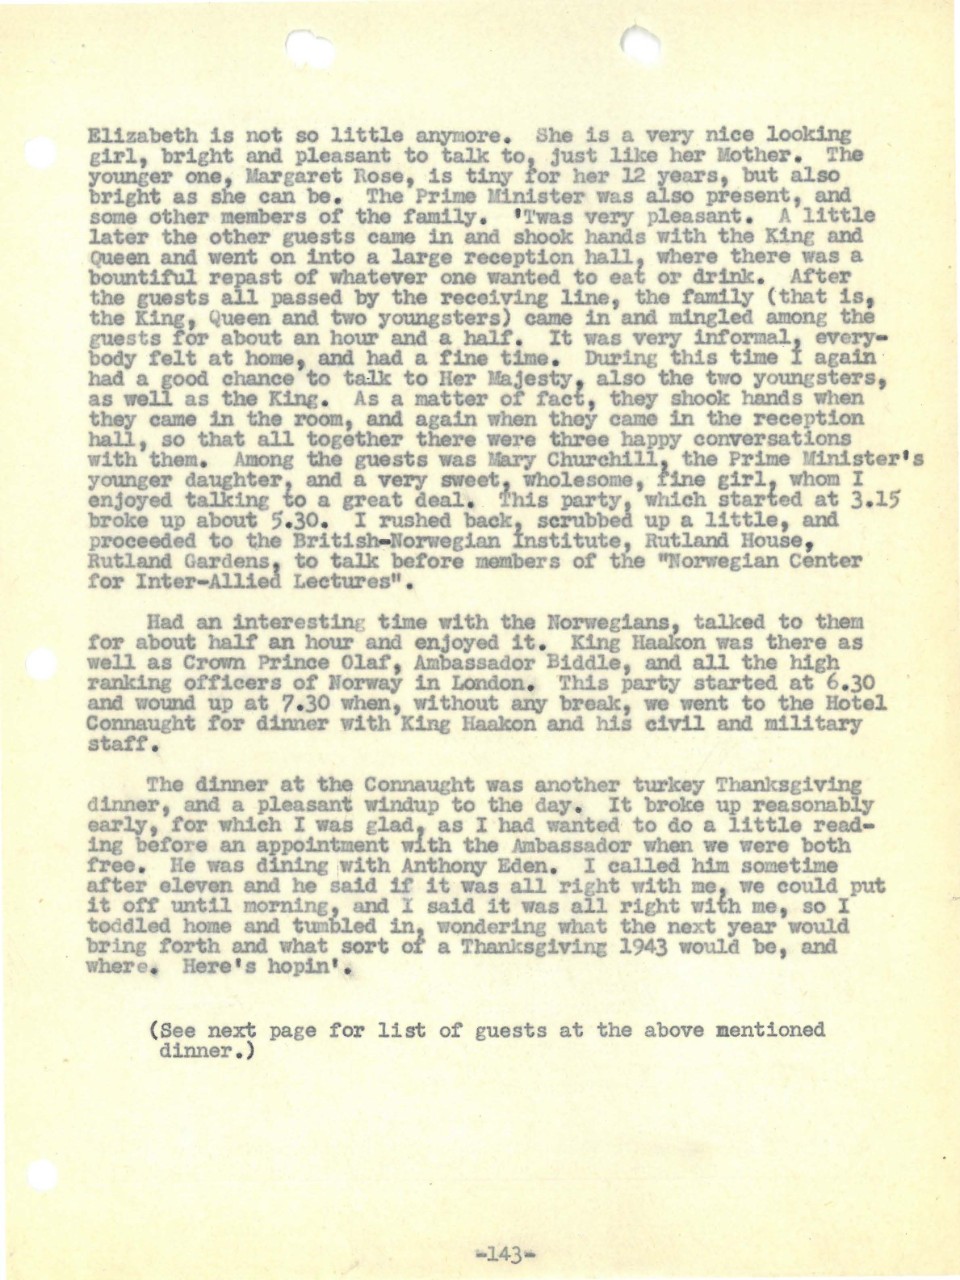 <p>Admiral Stark's Diary Entry for Thanksgiving Day 1942, page 2</p>
